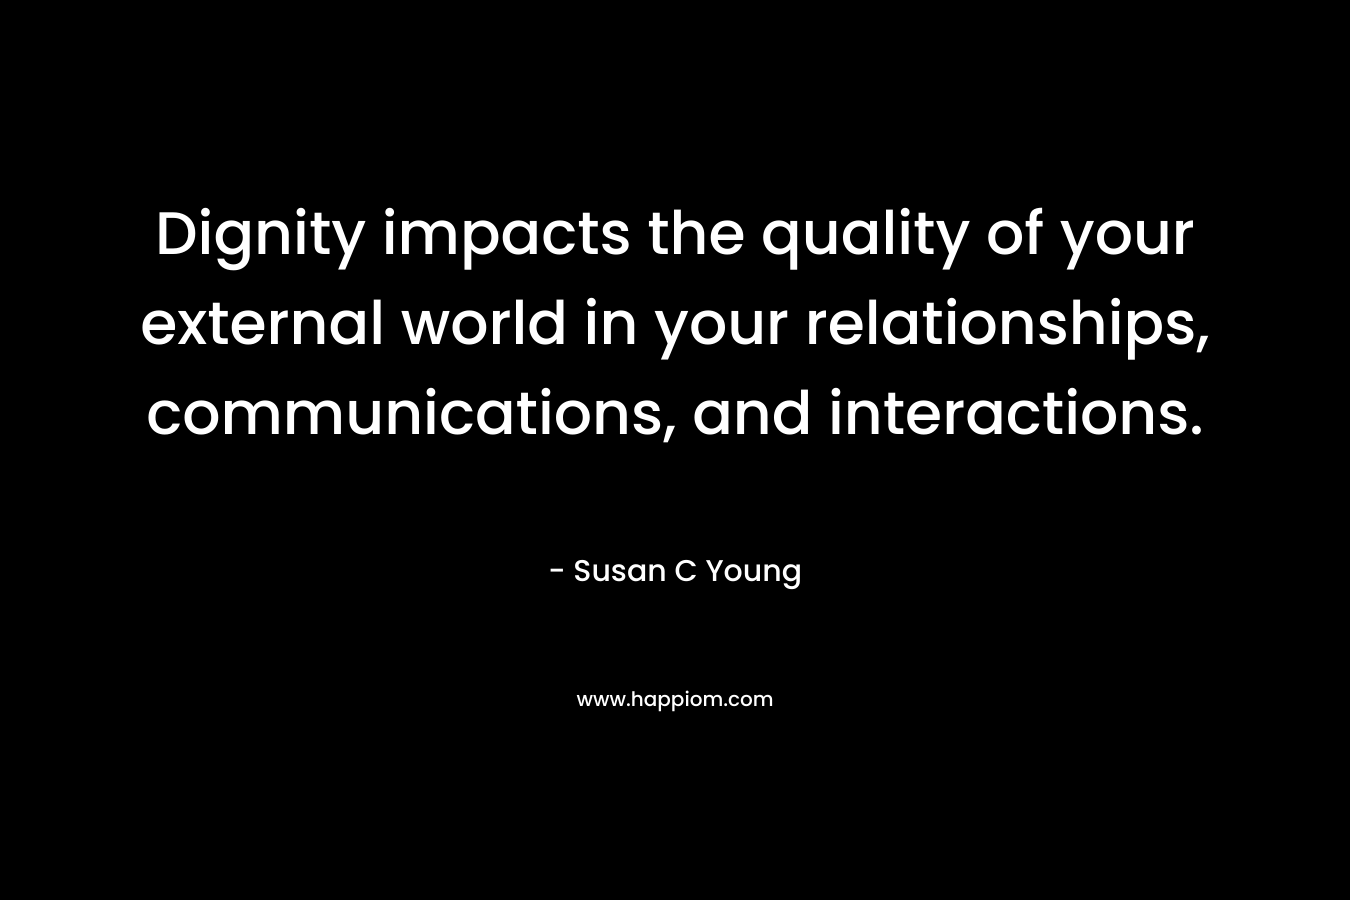 Dignity impacts the quality of your external world in your relationships, communications, and interactions. – Susan C Young